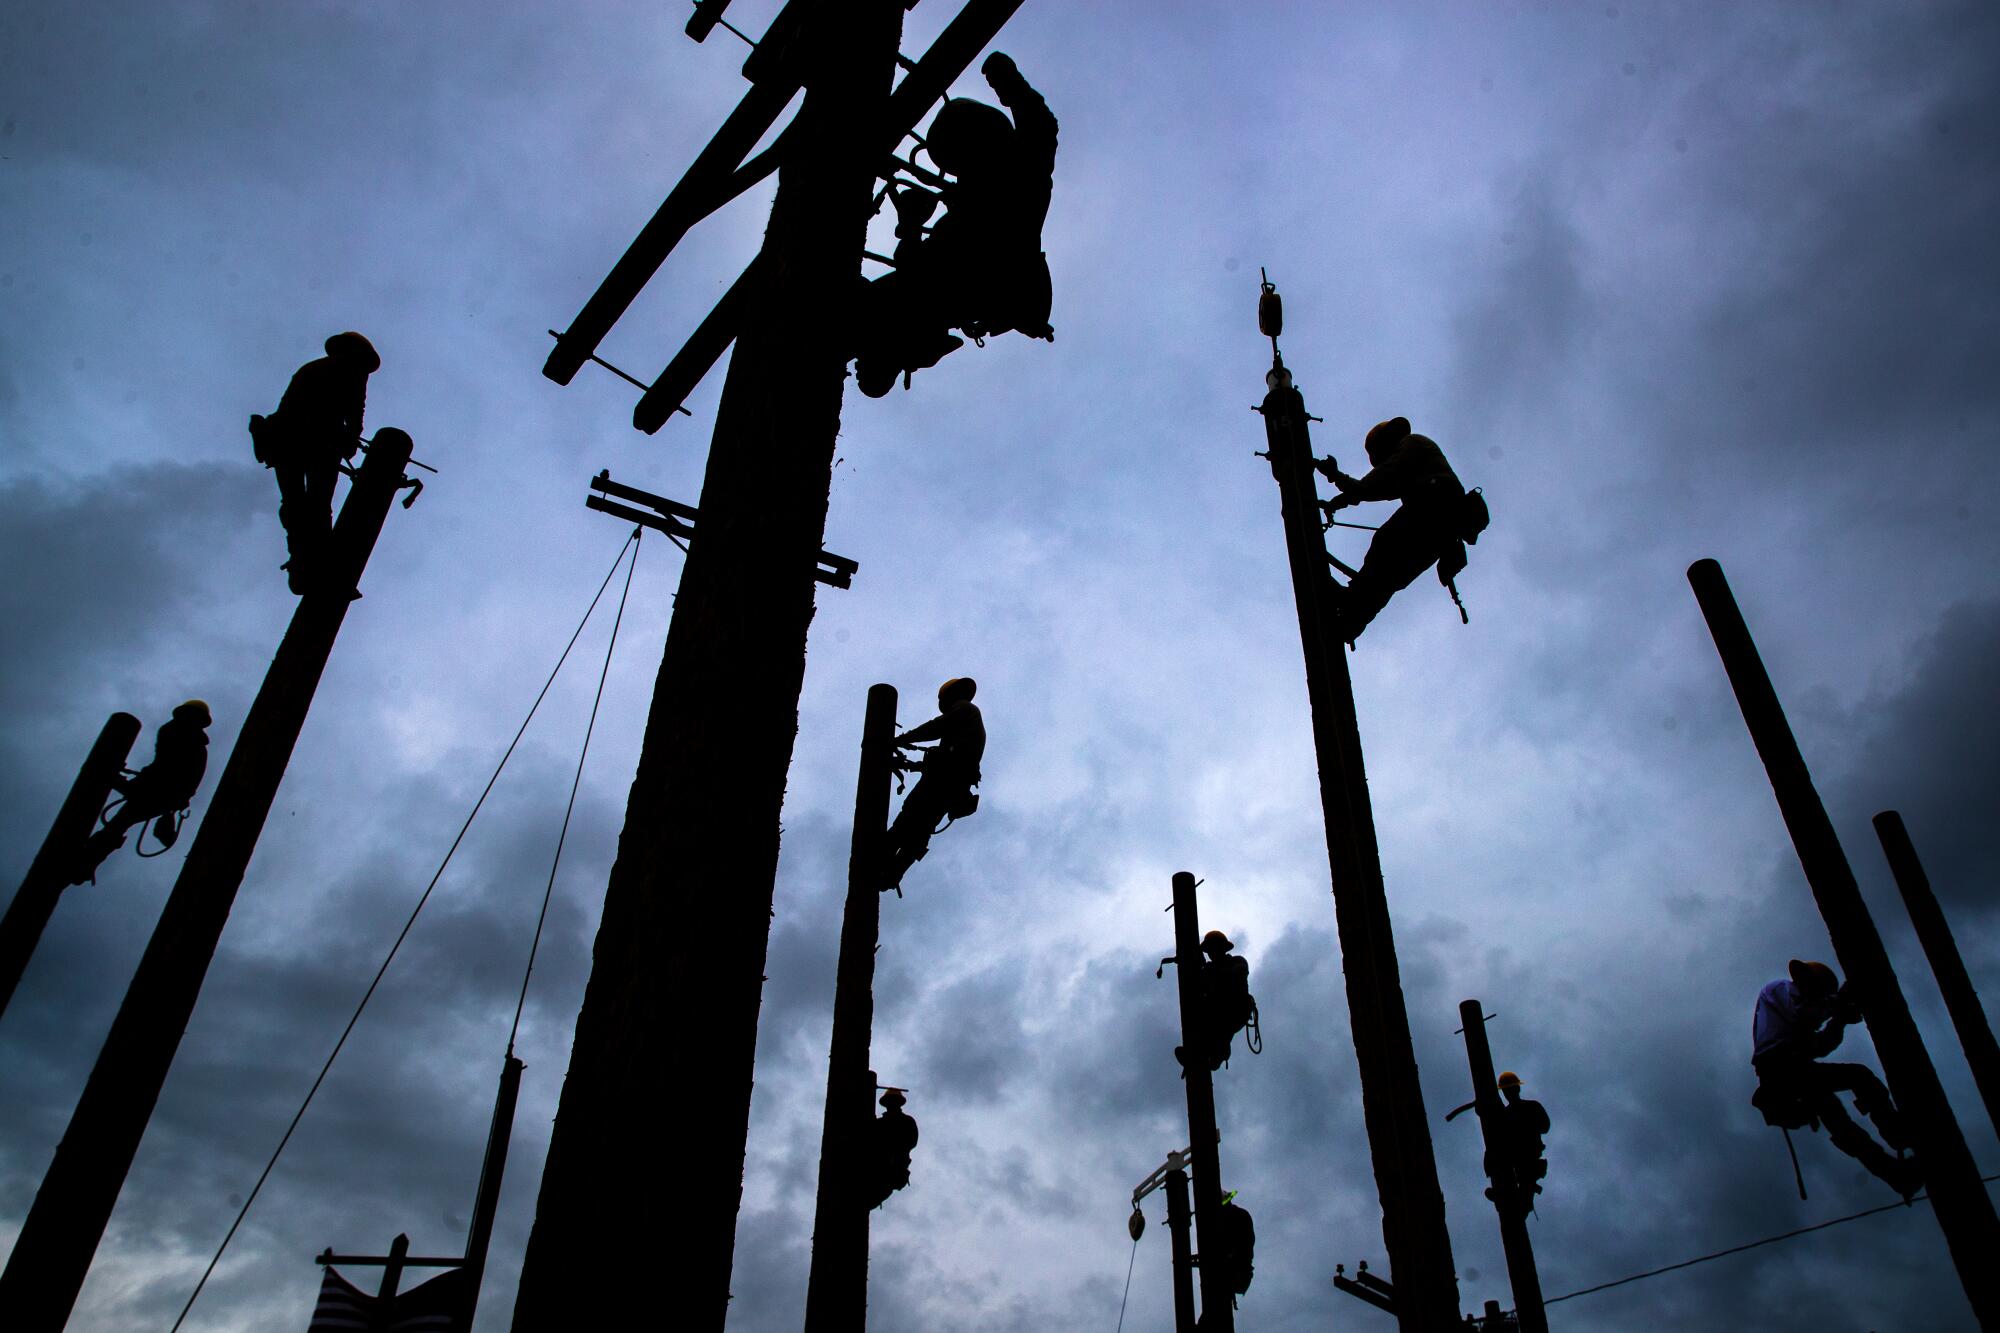 Students practice pole climbing at Los Angeles Trade-Technical College.